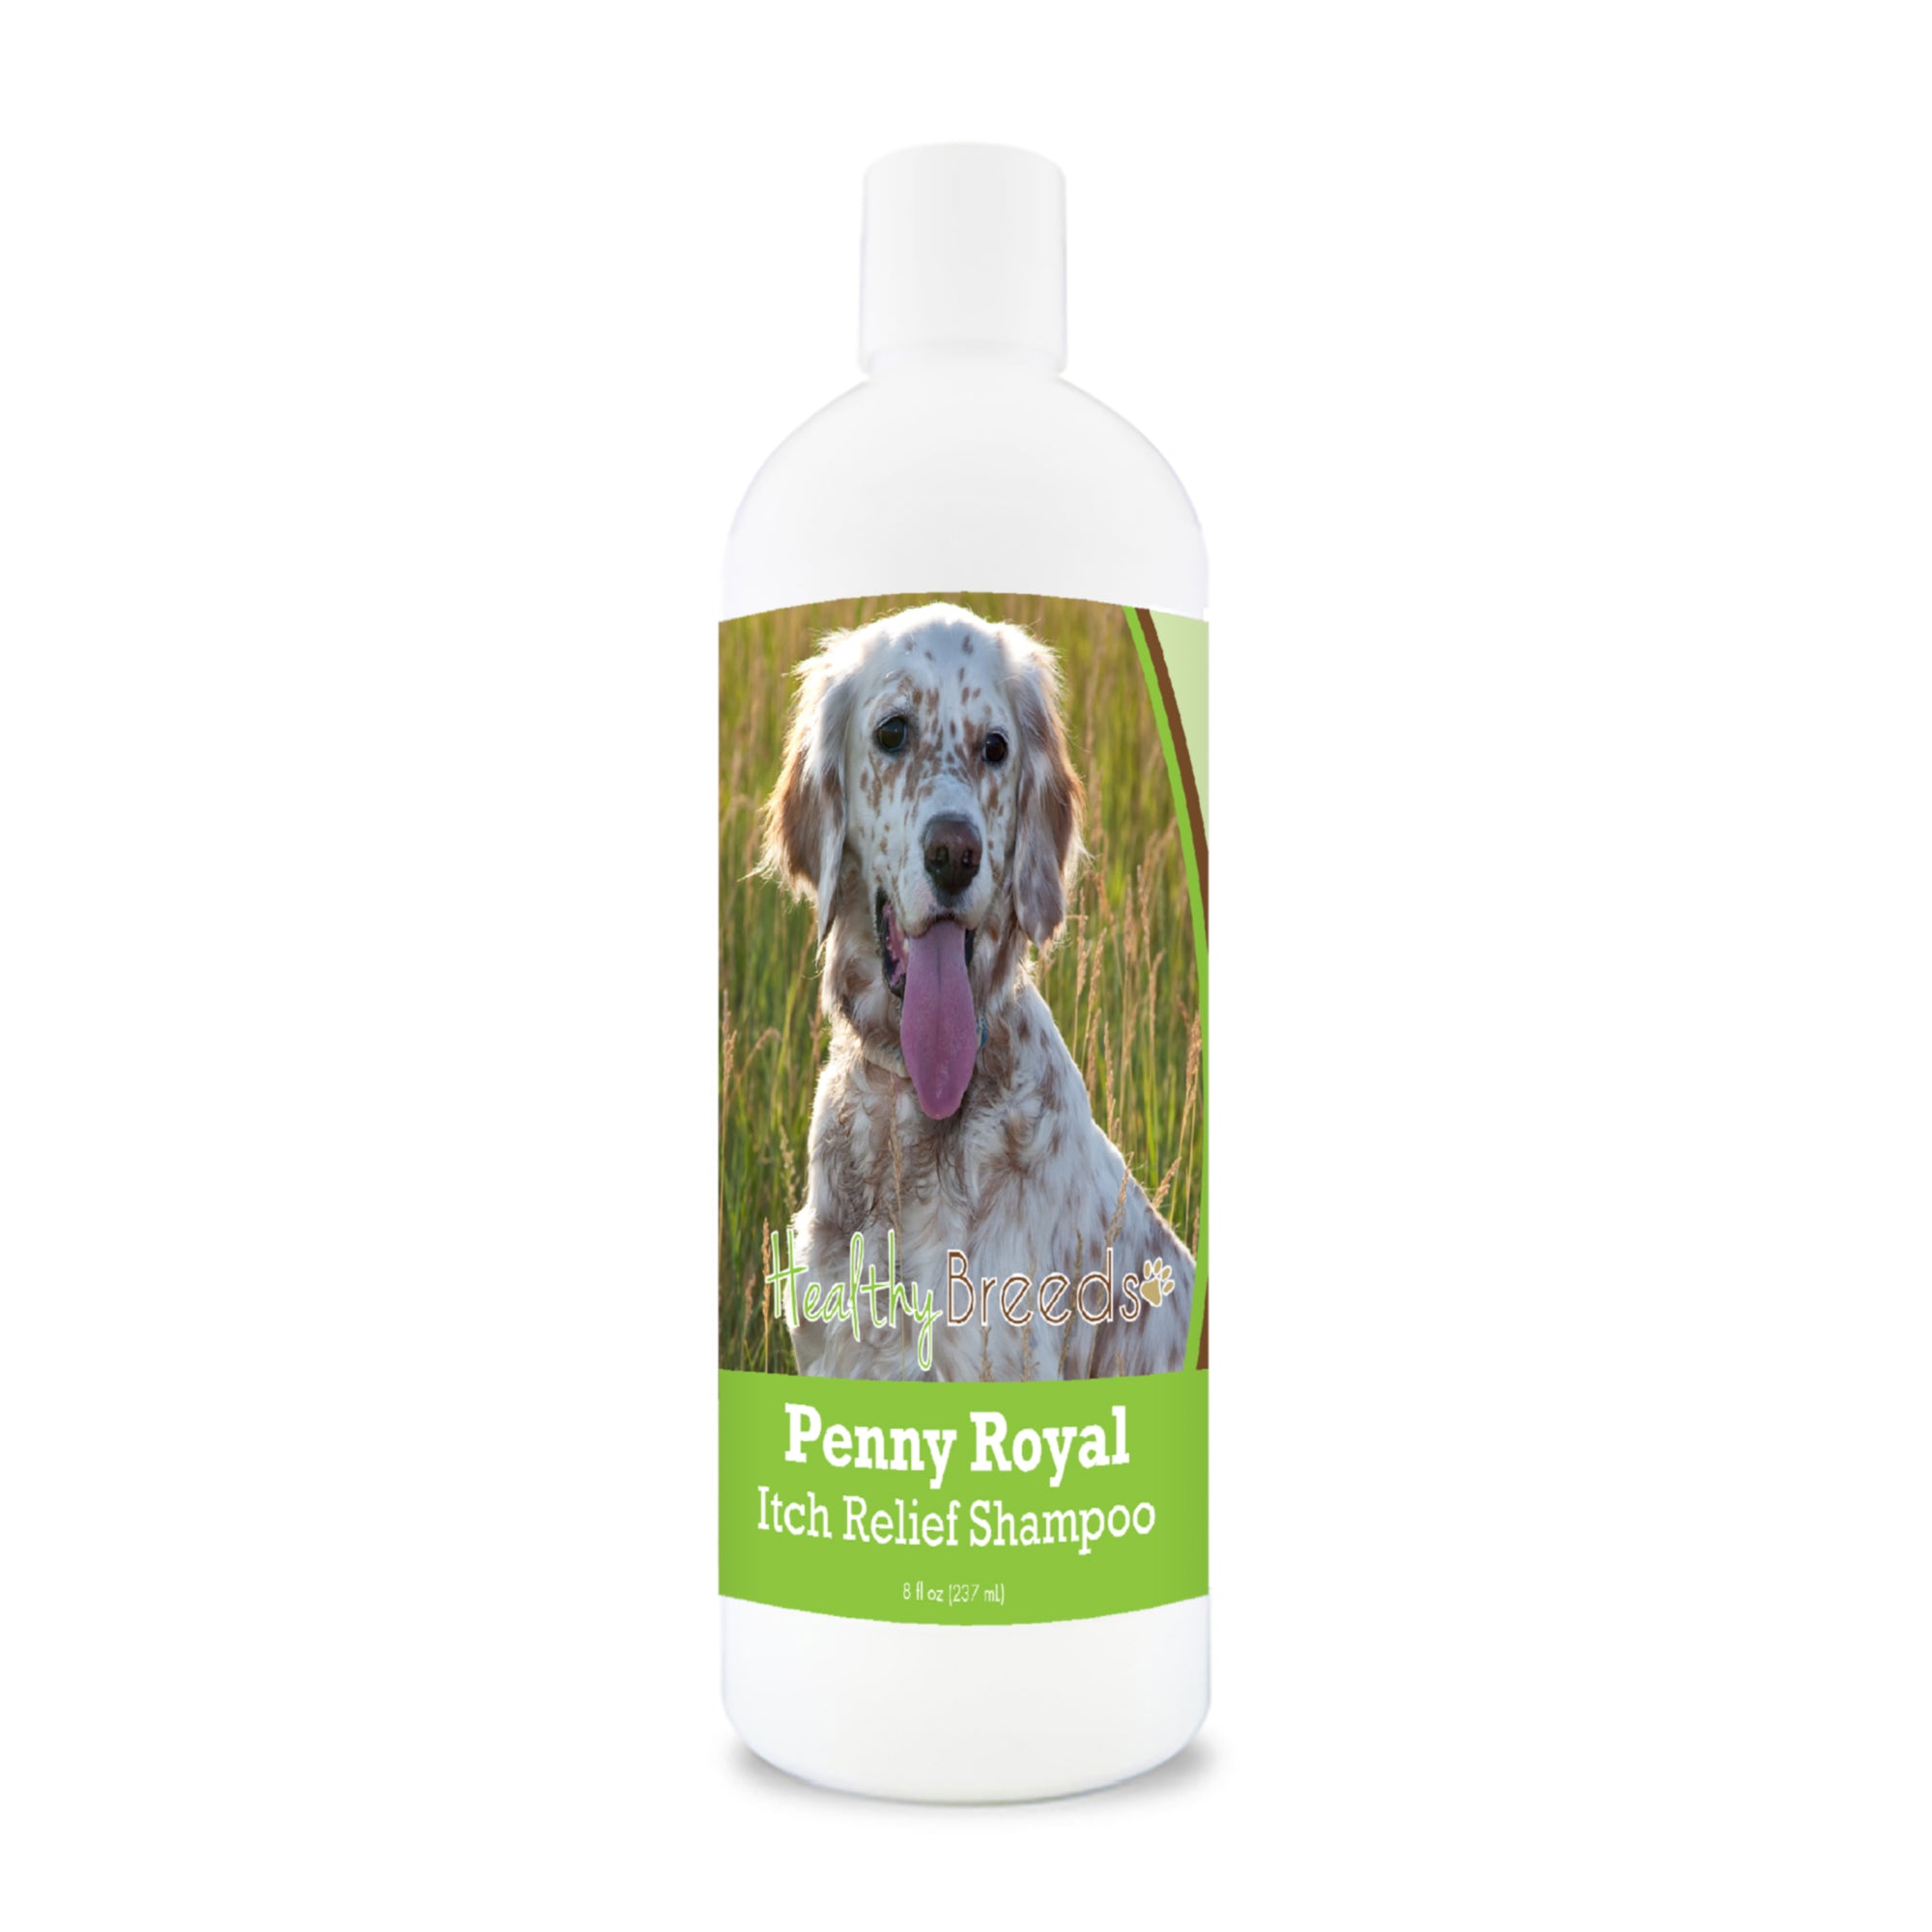 English Setter Penny Royal Itch Relief Shampoo 8 oz